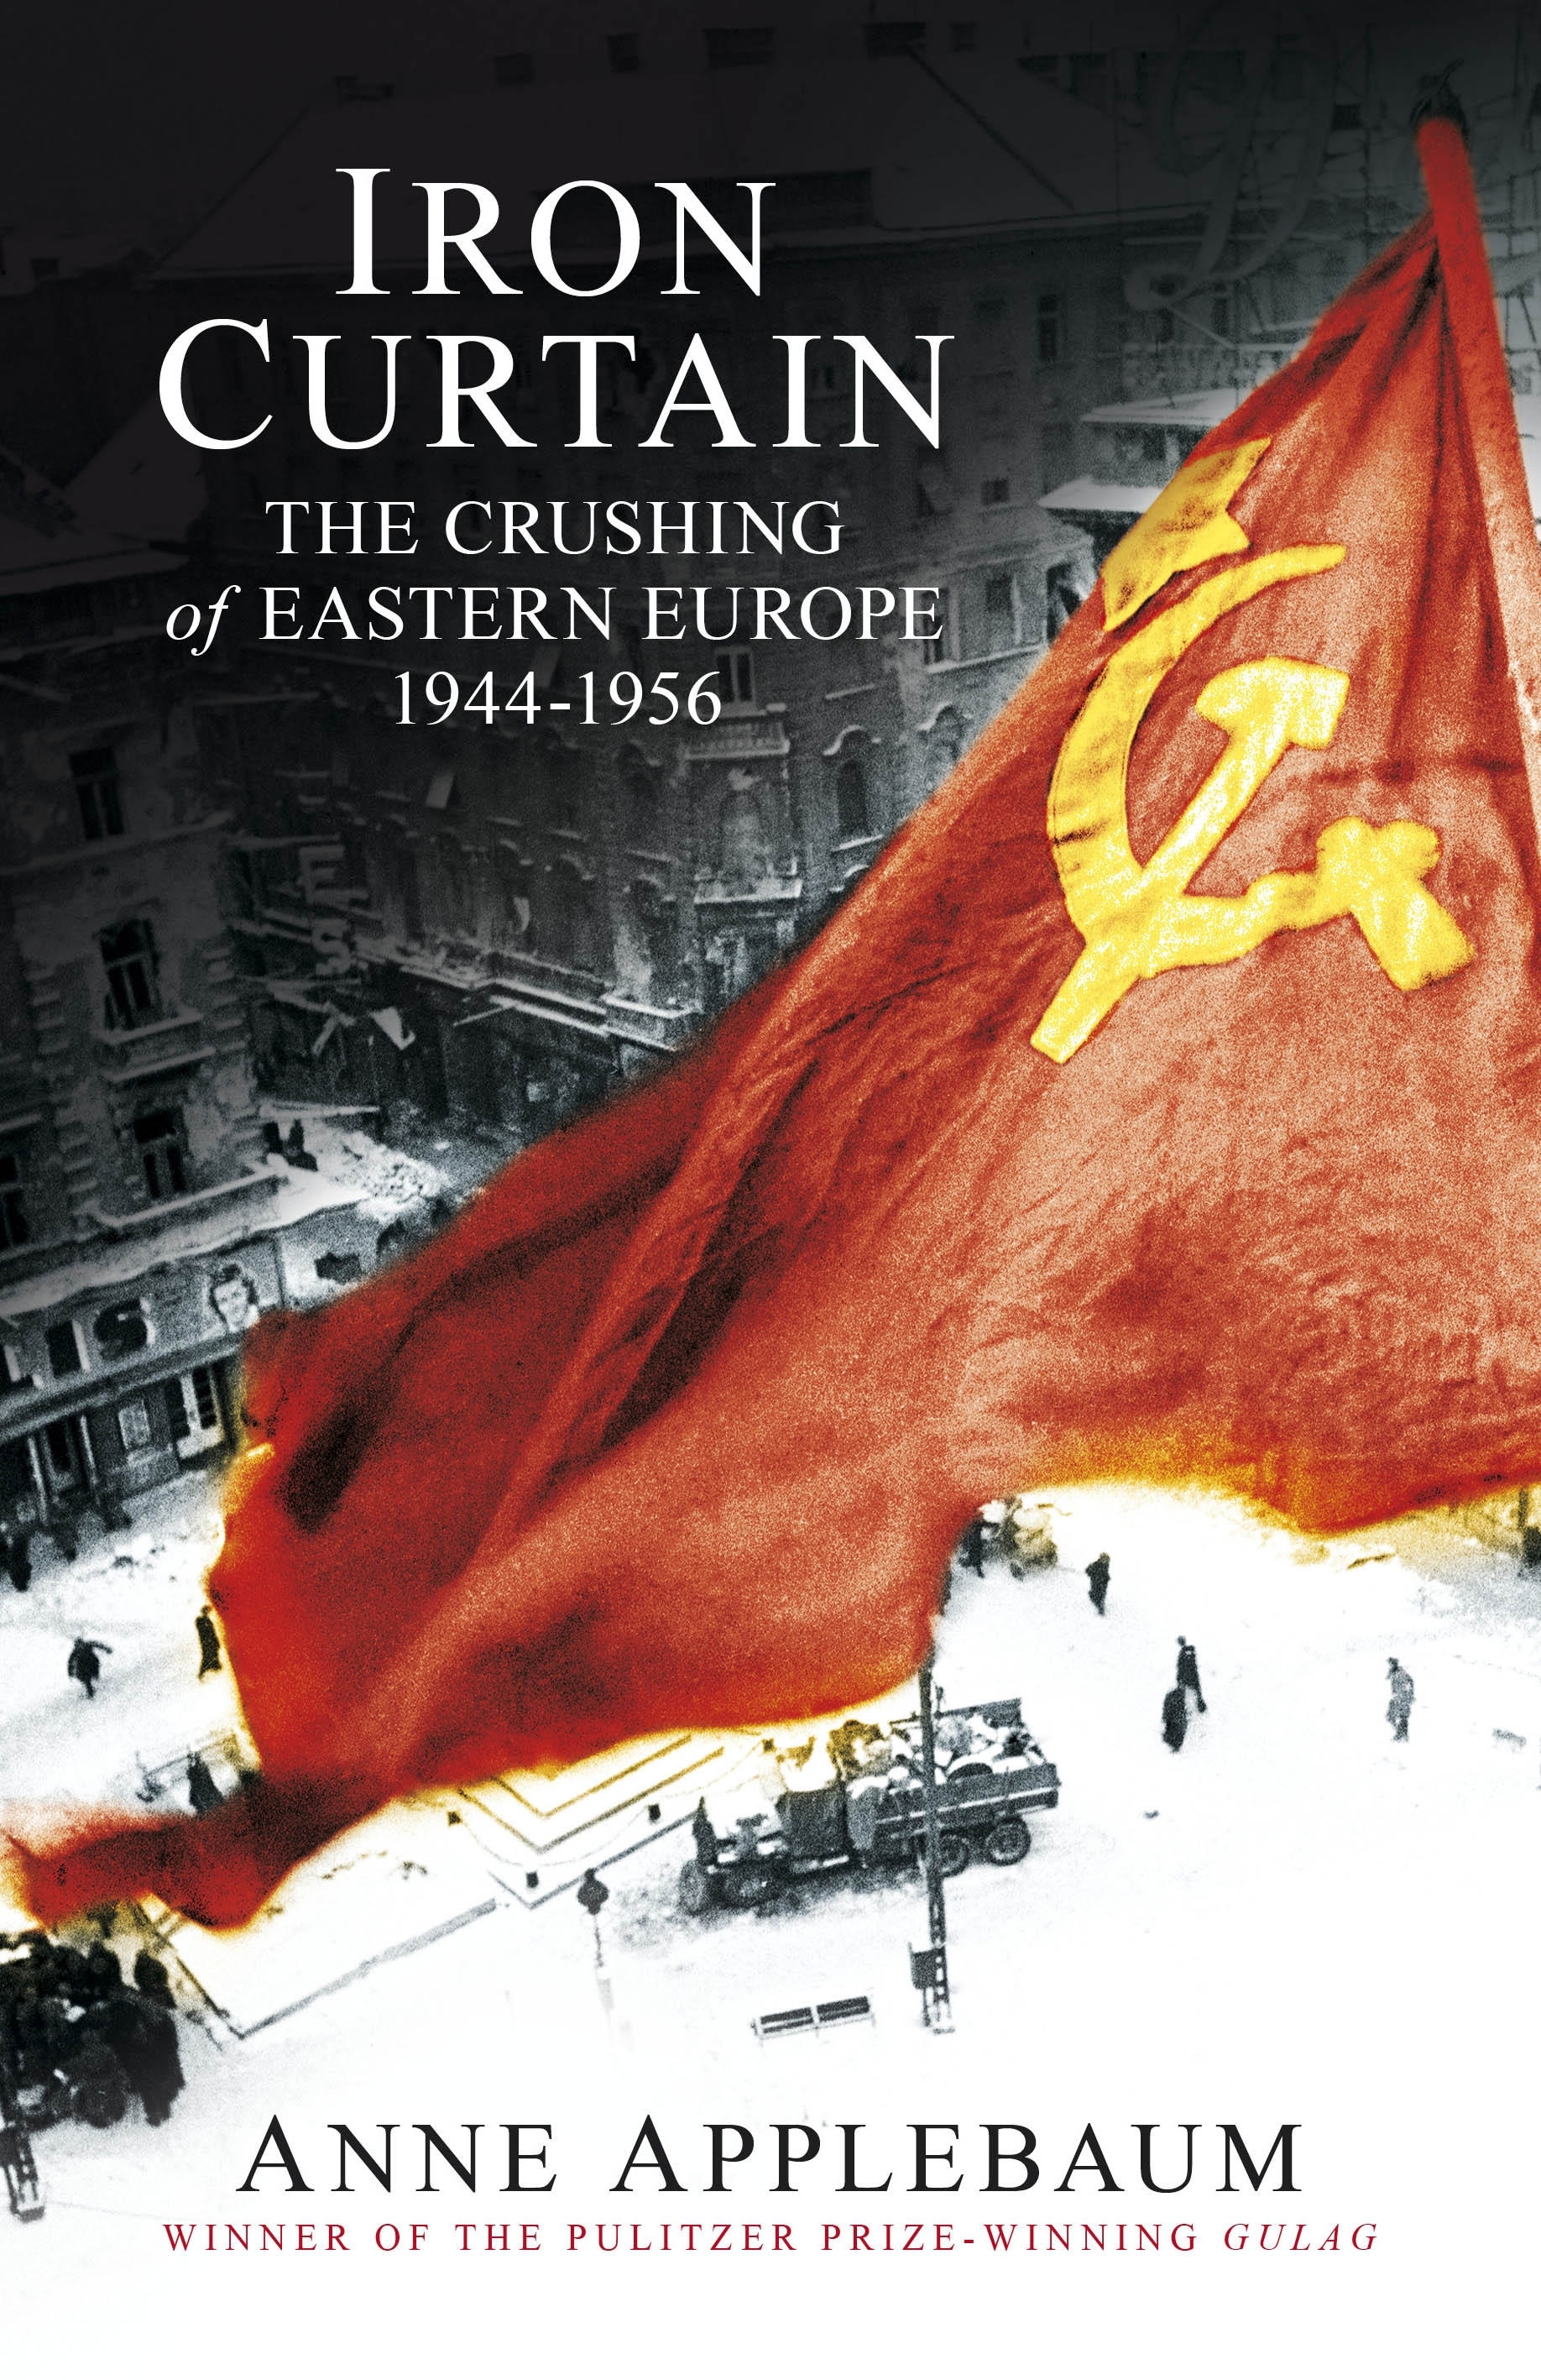 Iron Curtain: The Crushing of Eastern Europe 1944-1956. By Anne Applebaum.